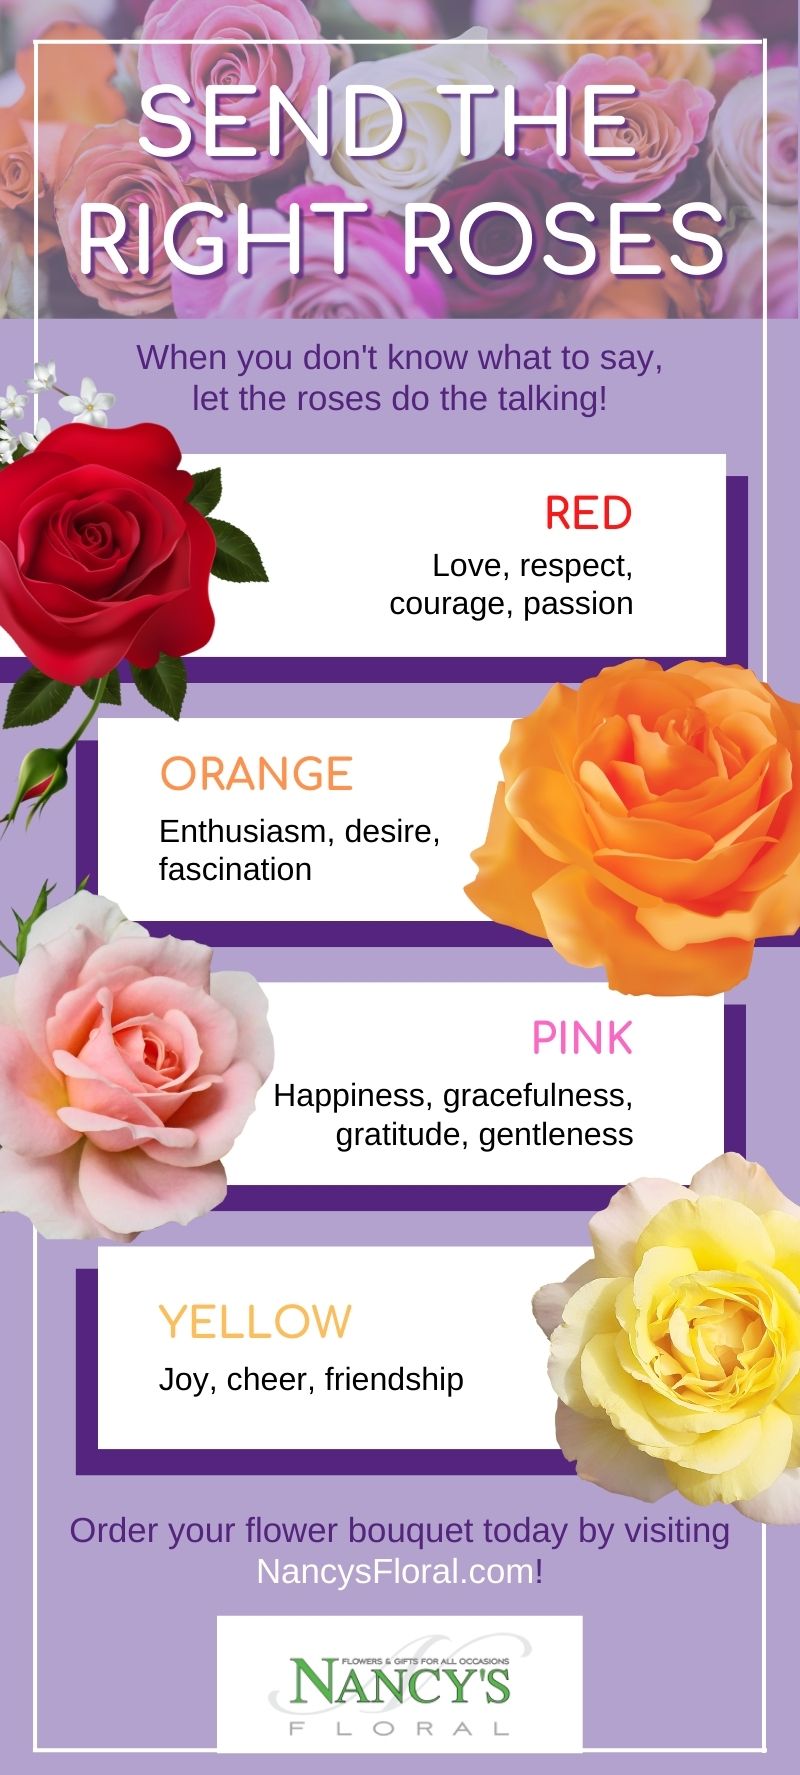 M3920 Nancys Floral Inc Send The Right Roses Infographic 